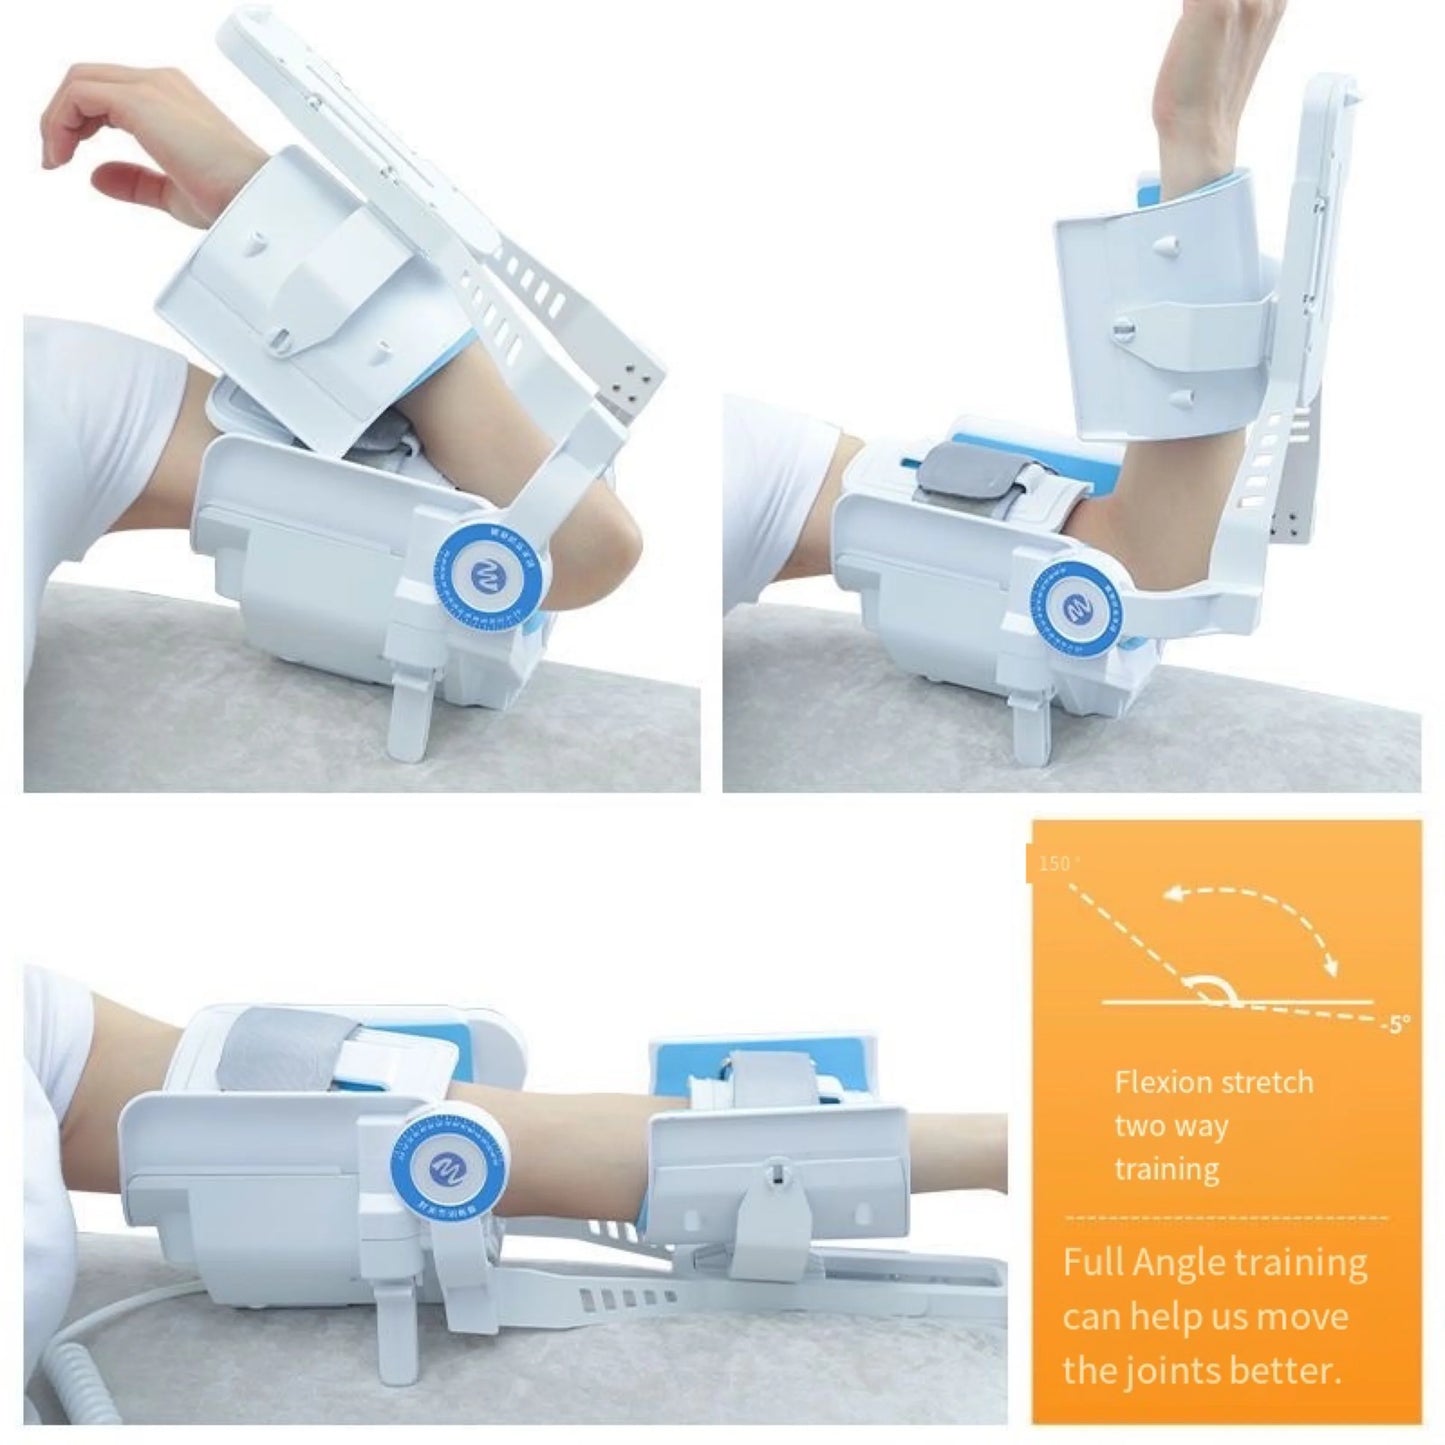 Elbow Joint Flexion and Extension Training Device